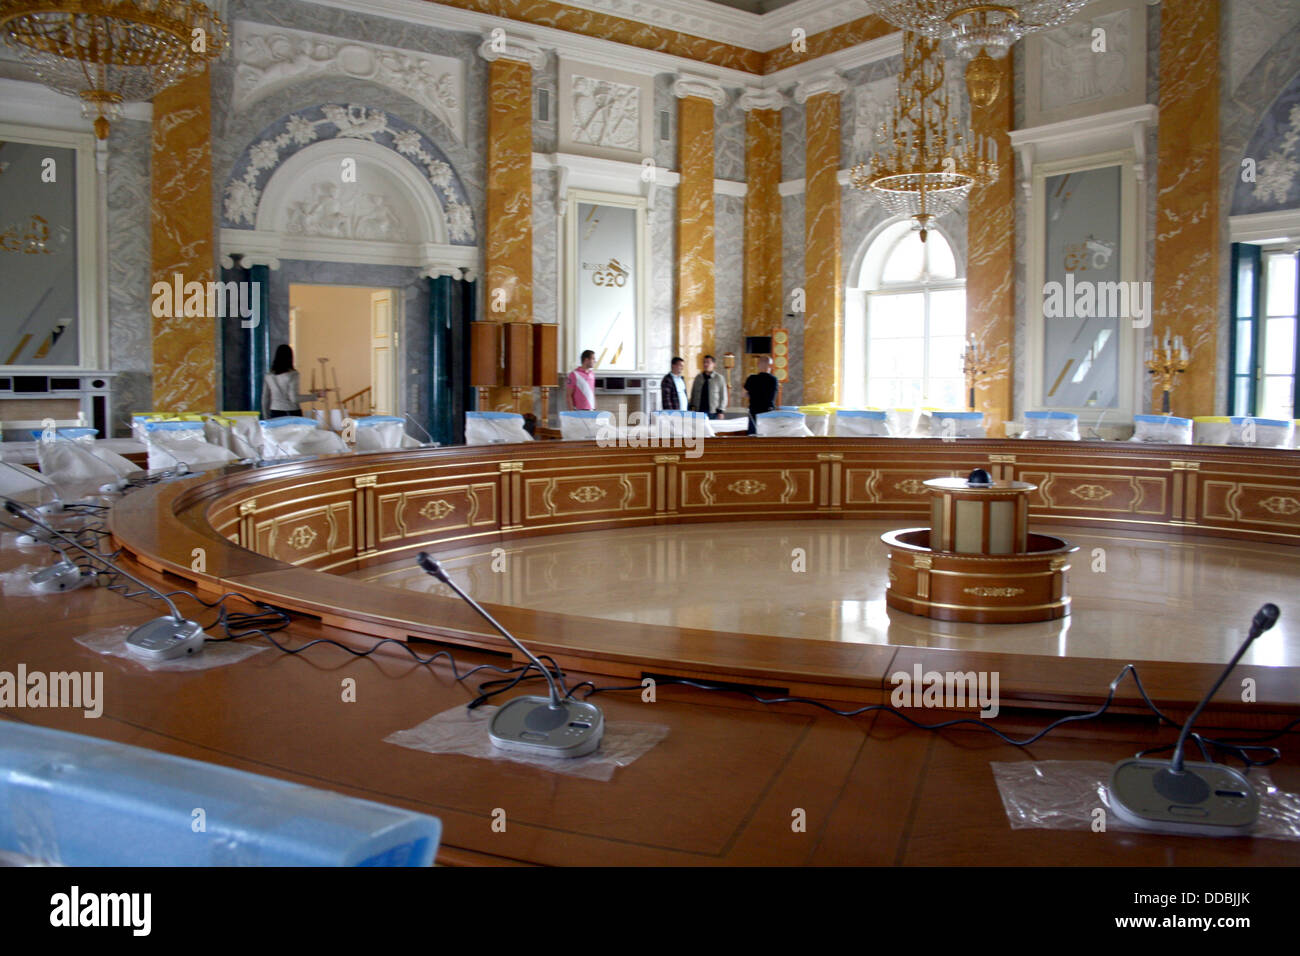 A view of the conference room in the Constantine Palace in Strelna near St. Petersburg, Russia, 22 August 2013. The Constantine Palace will be the venue for the G-20 summit on 05 and 06 September 2013. Photo: ULF MAUDER Stock Photo